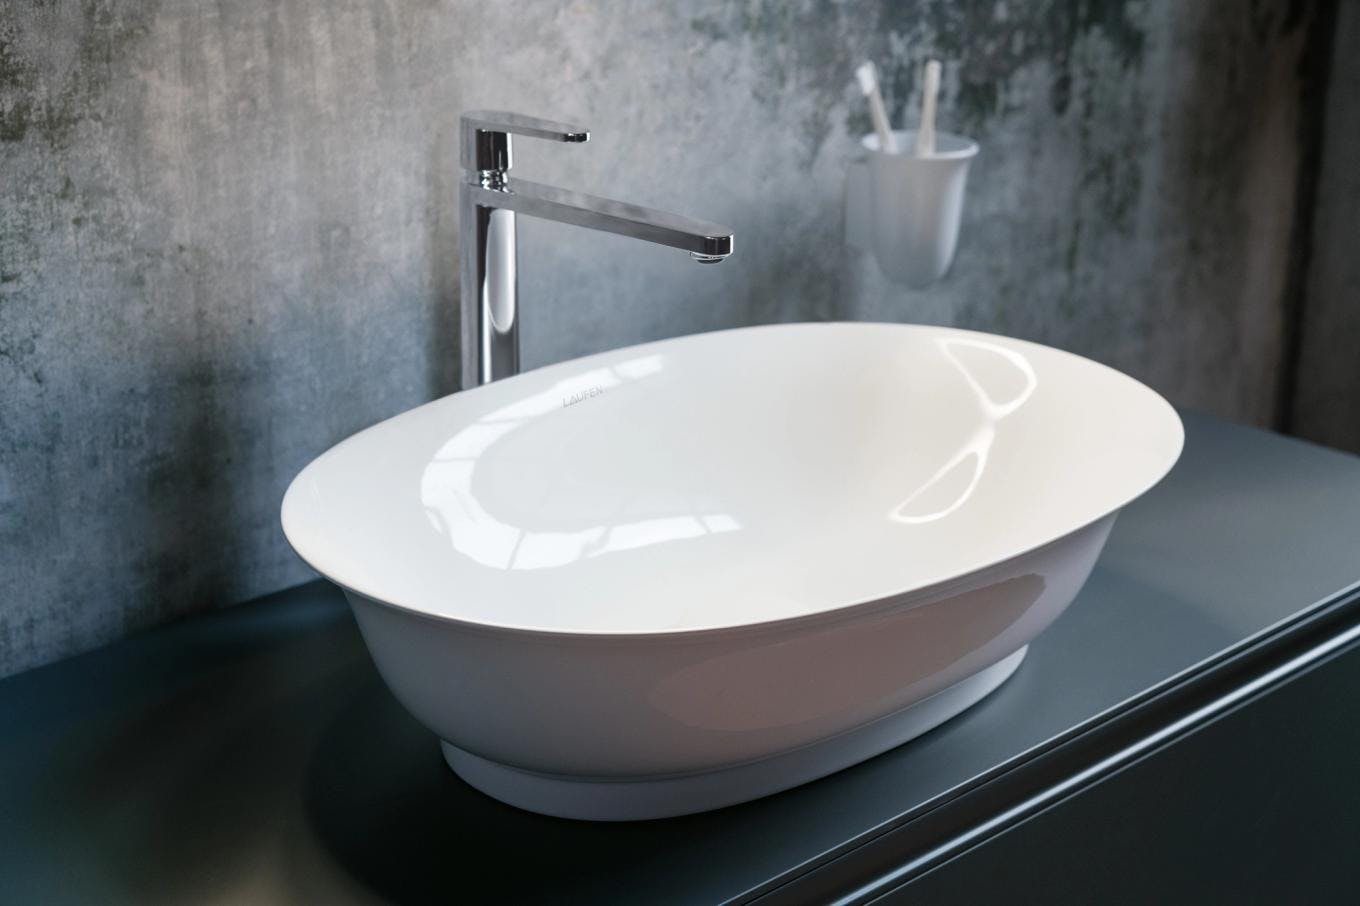 The New Classic Sink by Laufen